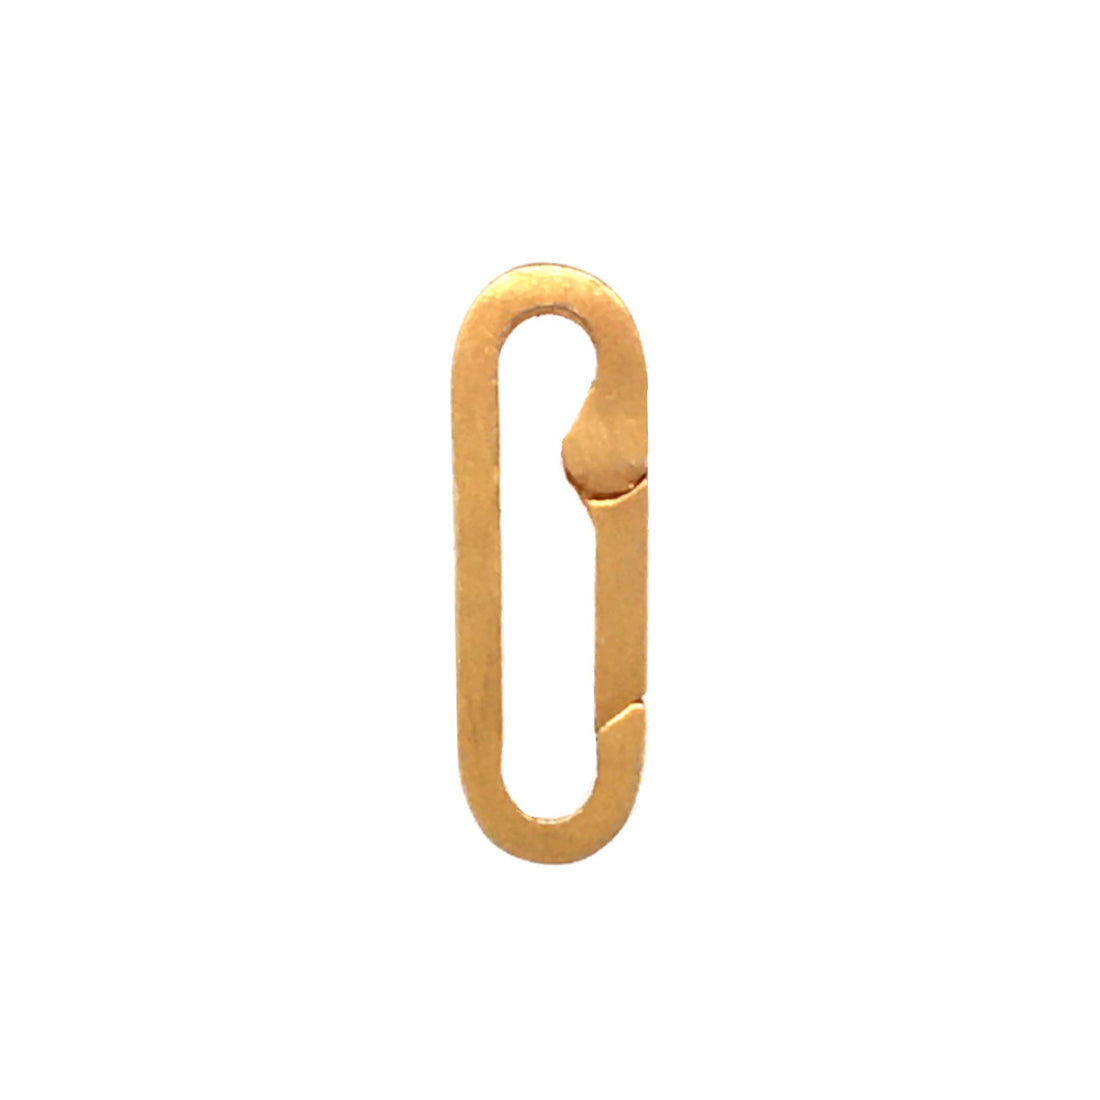 The Paper Clip Connector is made of 18kt Gold Plate and designed to easily add your Talisman Pendants.